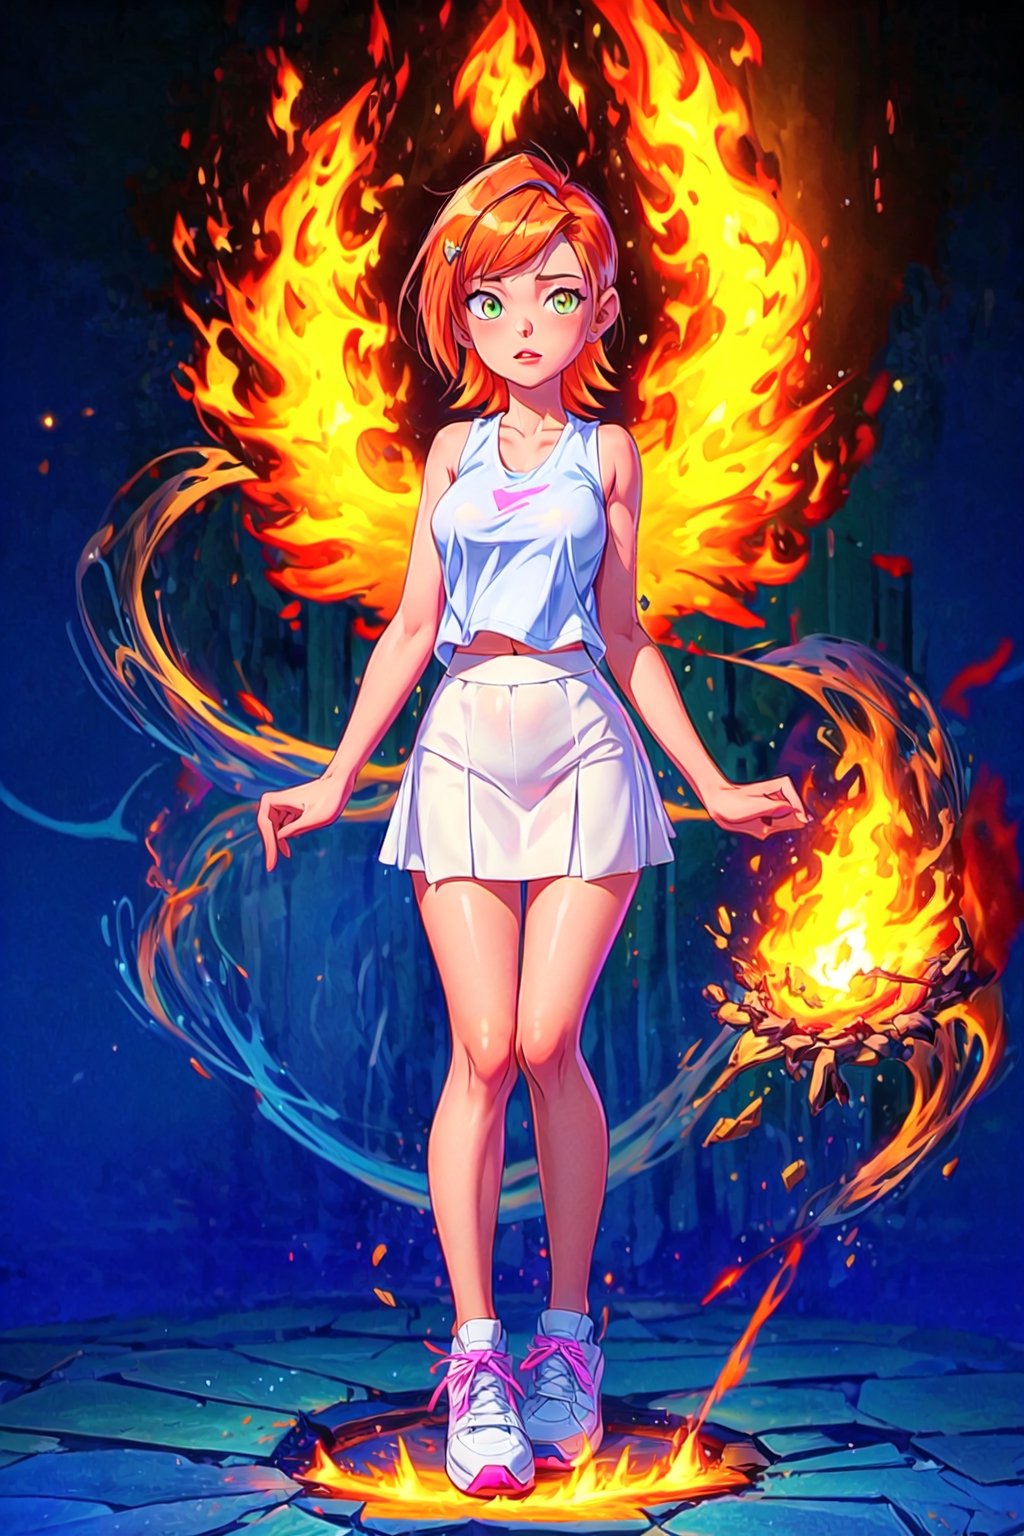 (masterpiece: 1.2), best quality, PIXIV, arcana, 1 girl, fire background, fire hair, fire dragon, red glow, girl, sharp eyes, short hair with long locks, full lips, gwendolyn Tennyson, skirt white, wide bust, perfect ass, (white skirt) light blue tank top, pink sneakers, full body, (Gwendolyn Tennyson), details on the hands, details on the face, no contrast, no watermark, image of high quality, full body image